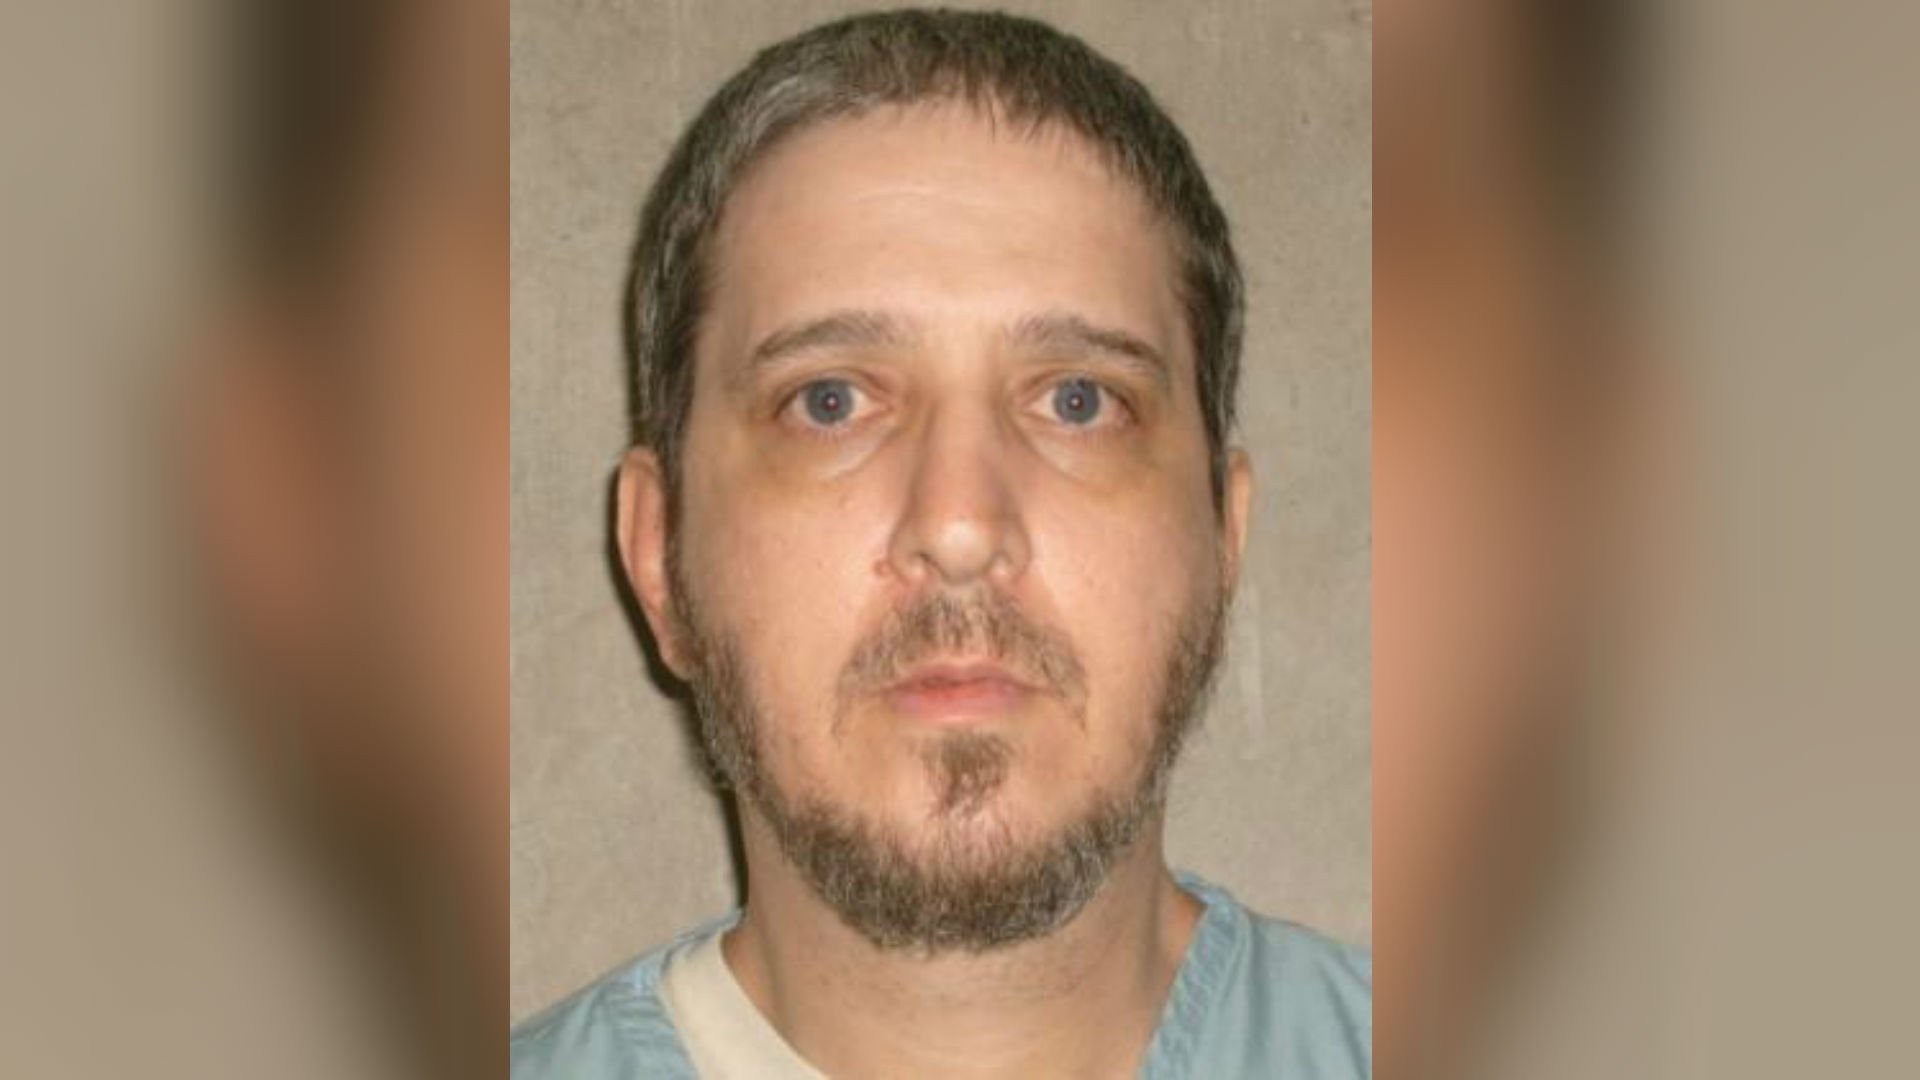 Death row inmate Richard Glossip is scheduled for execution next month, despite prosecutors and Kim Kardashian speaking out.